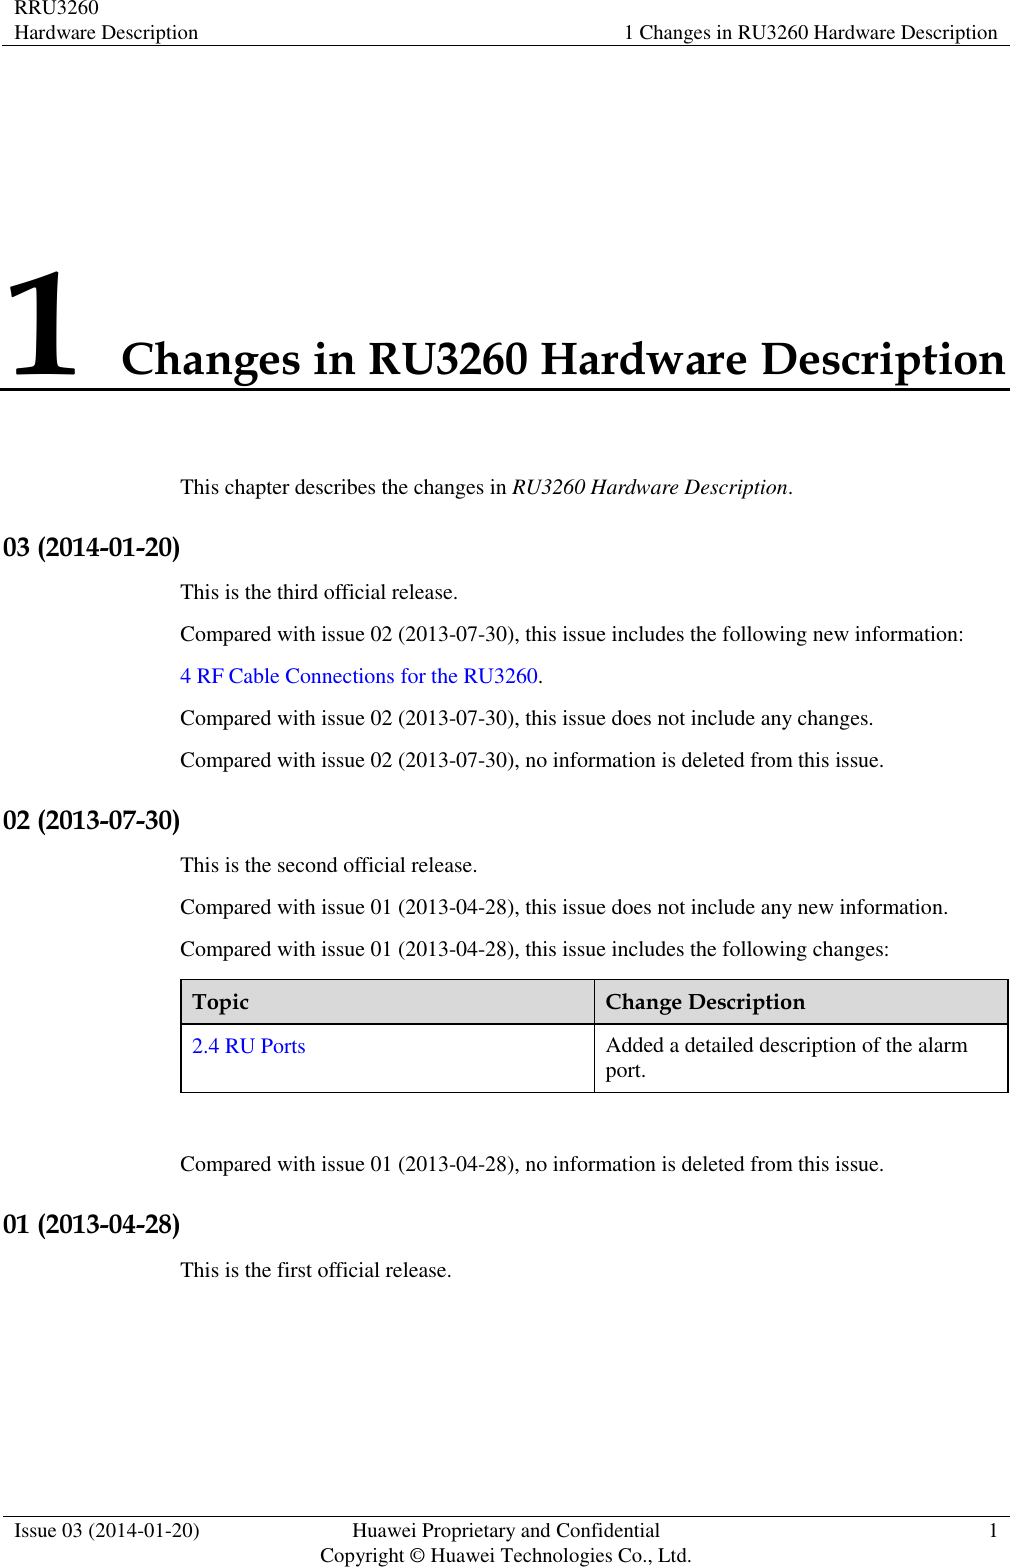 RRU3260 Hardware Description 1 Changes in RU3260 Hardware Description  Issue 03 (2014-01-20) Huawei Proprietary and Confidential                                     Copyright © Huawei Technologies Co., Ltd. 1  1 Changes in RU3260 Hardware Description This chapter describes the changes in RU3260 Hardware Description. 03 (2014-01-20) This is the third official release. Compared with issue 02 (2013-07-30), this issue includes the following new information: 4 RF Cable Connections for the RU3260. Compared with issue 02 (2013-07-30), this issue does not include any changes. Compared with issue 02 (2013-07-30), no information is deleted from this issue. 02 (2013-07-30) This is the second official release. Compared with issue 01 (2013-04-28), this issue does not include any new information. Compared with issue 01 (2013-04-28), this issue includes the following changes: Topic Change Description 2.4 RU Ports Added a detailed description of the alarm port.  Compared with issue 01 (2013-04-28), no information is deleted from this issue. 01 (2013-04-28) This is the first official release. 